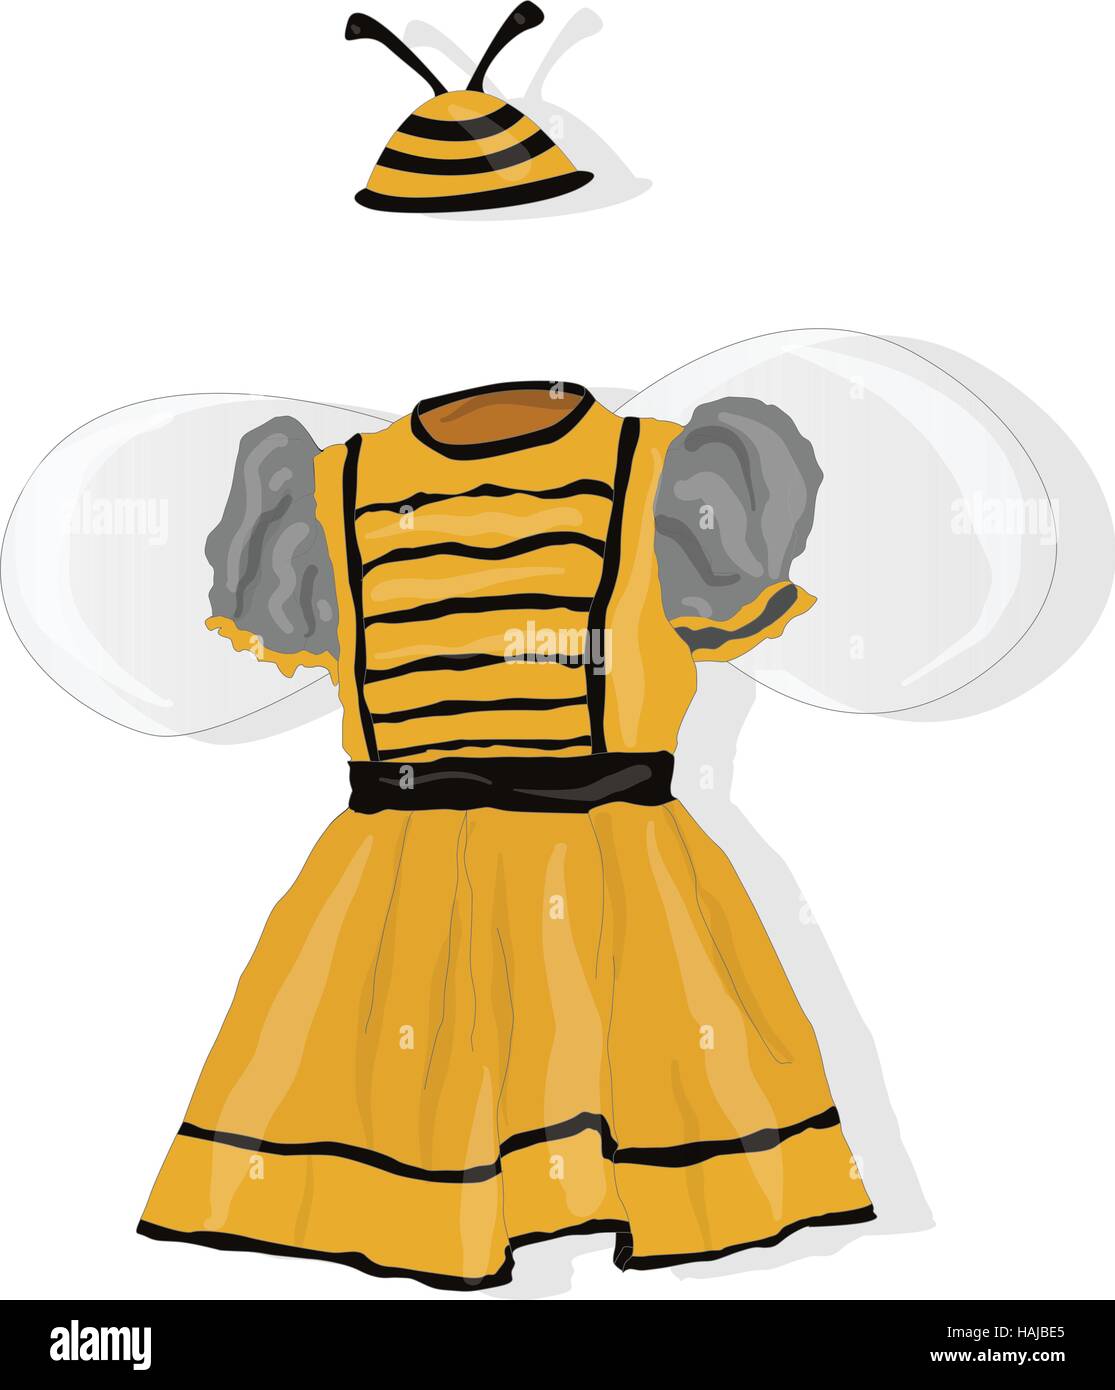 Lady in Fancy Dress clipart. Free download transparent .PNG | Creazilla